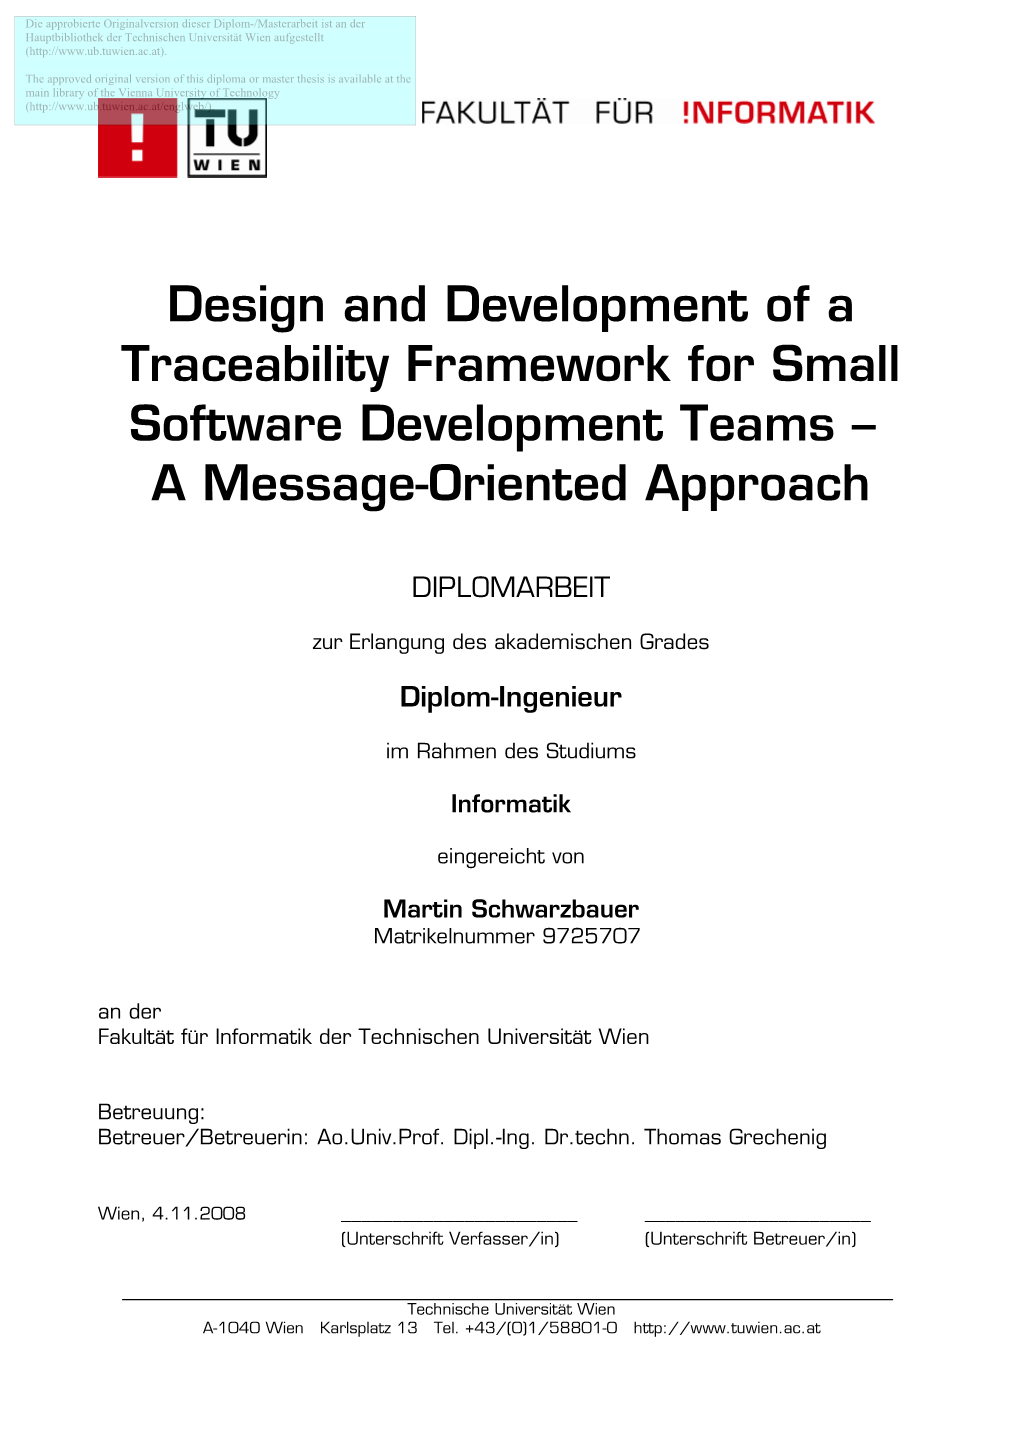 Design and Development of a Traceability Framework for Small Software Development Teams – a Message-Oriented Approach